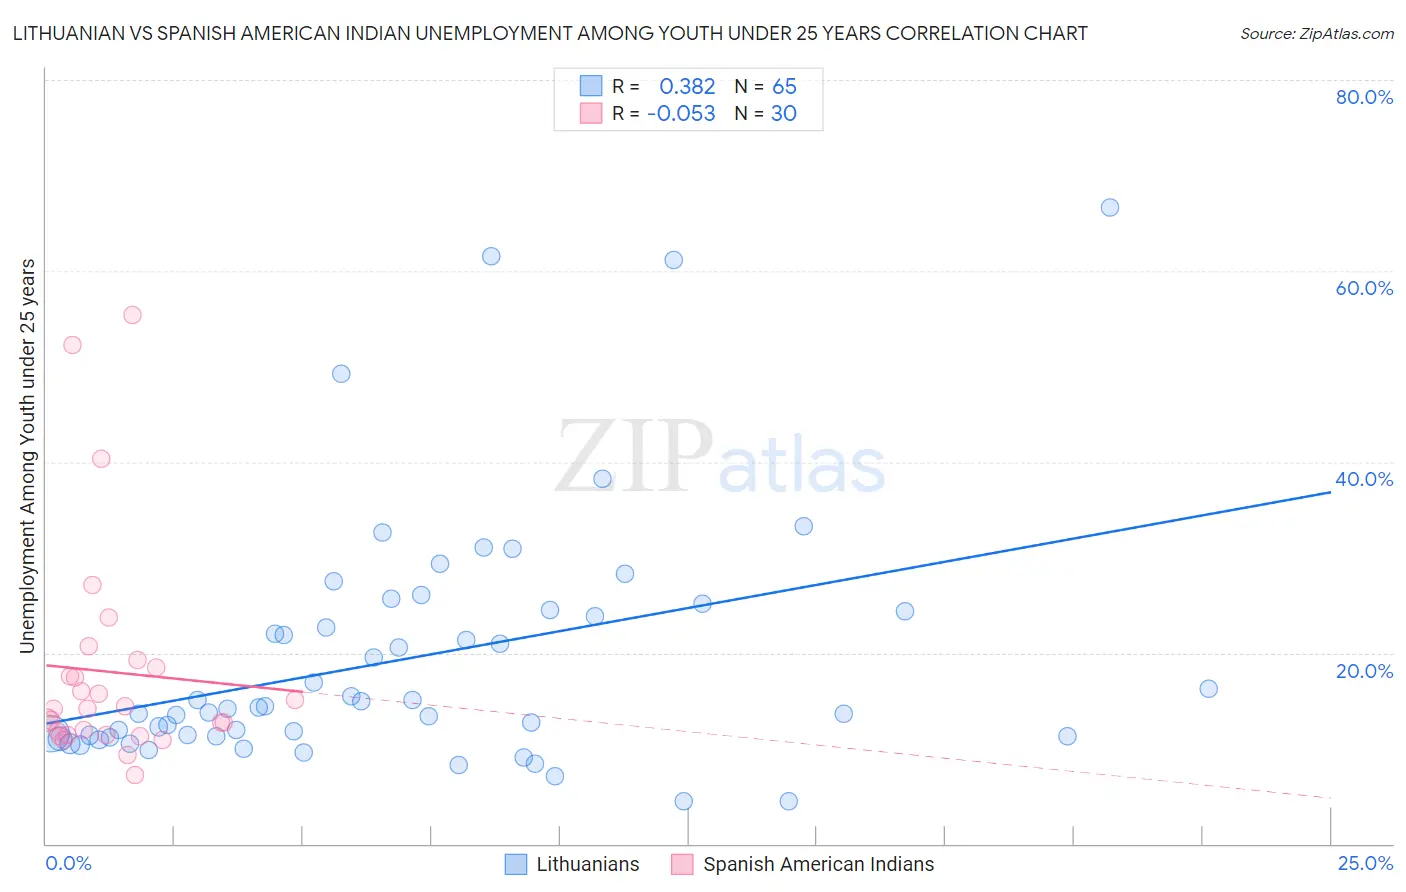 Lithuanian vs Spanish American Indian Unemployment Among Youth under 25 years